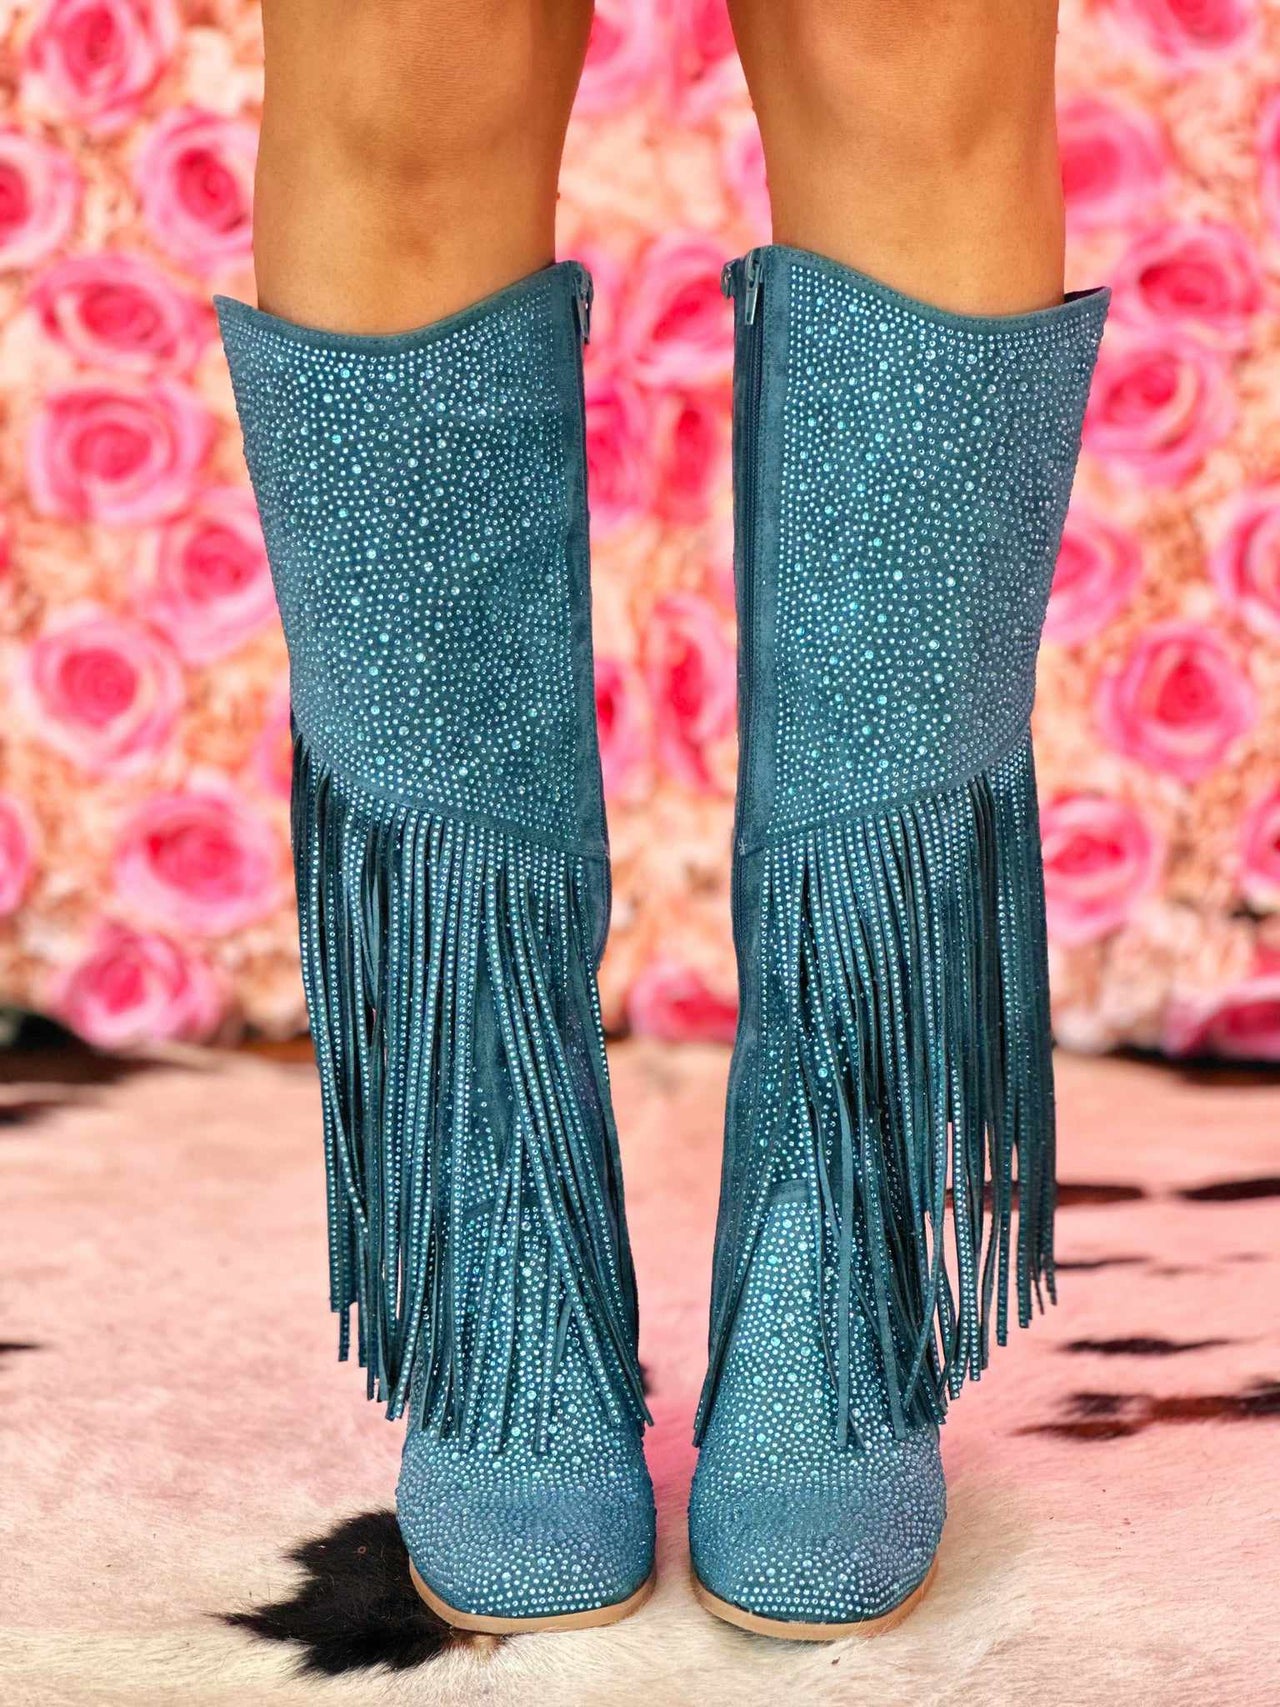 Blue cowgirl boots with fringe and rhinestones